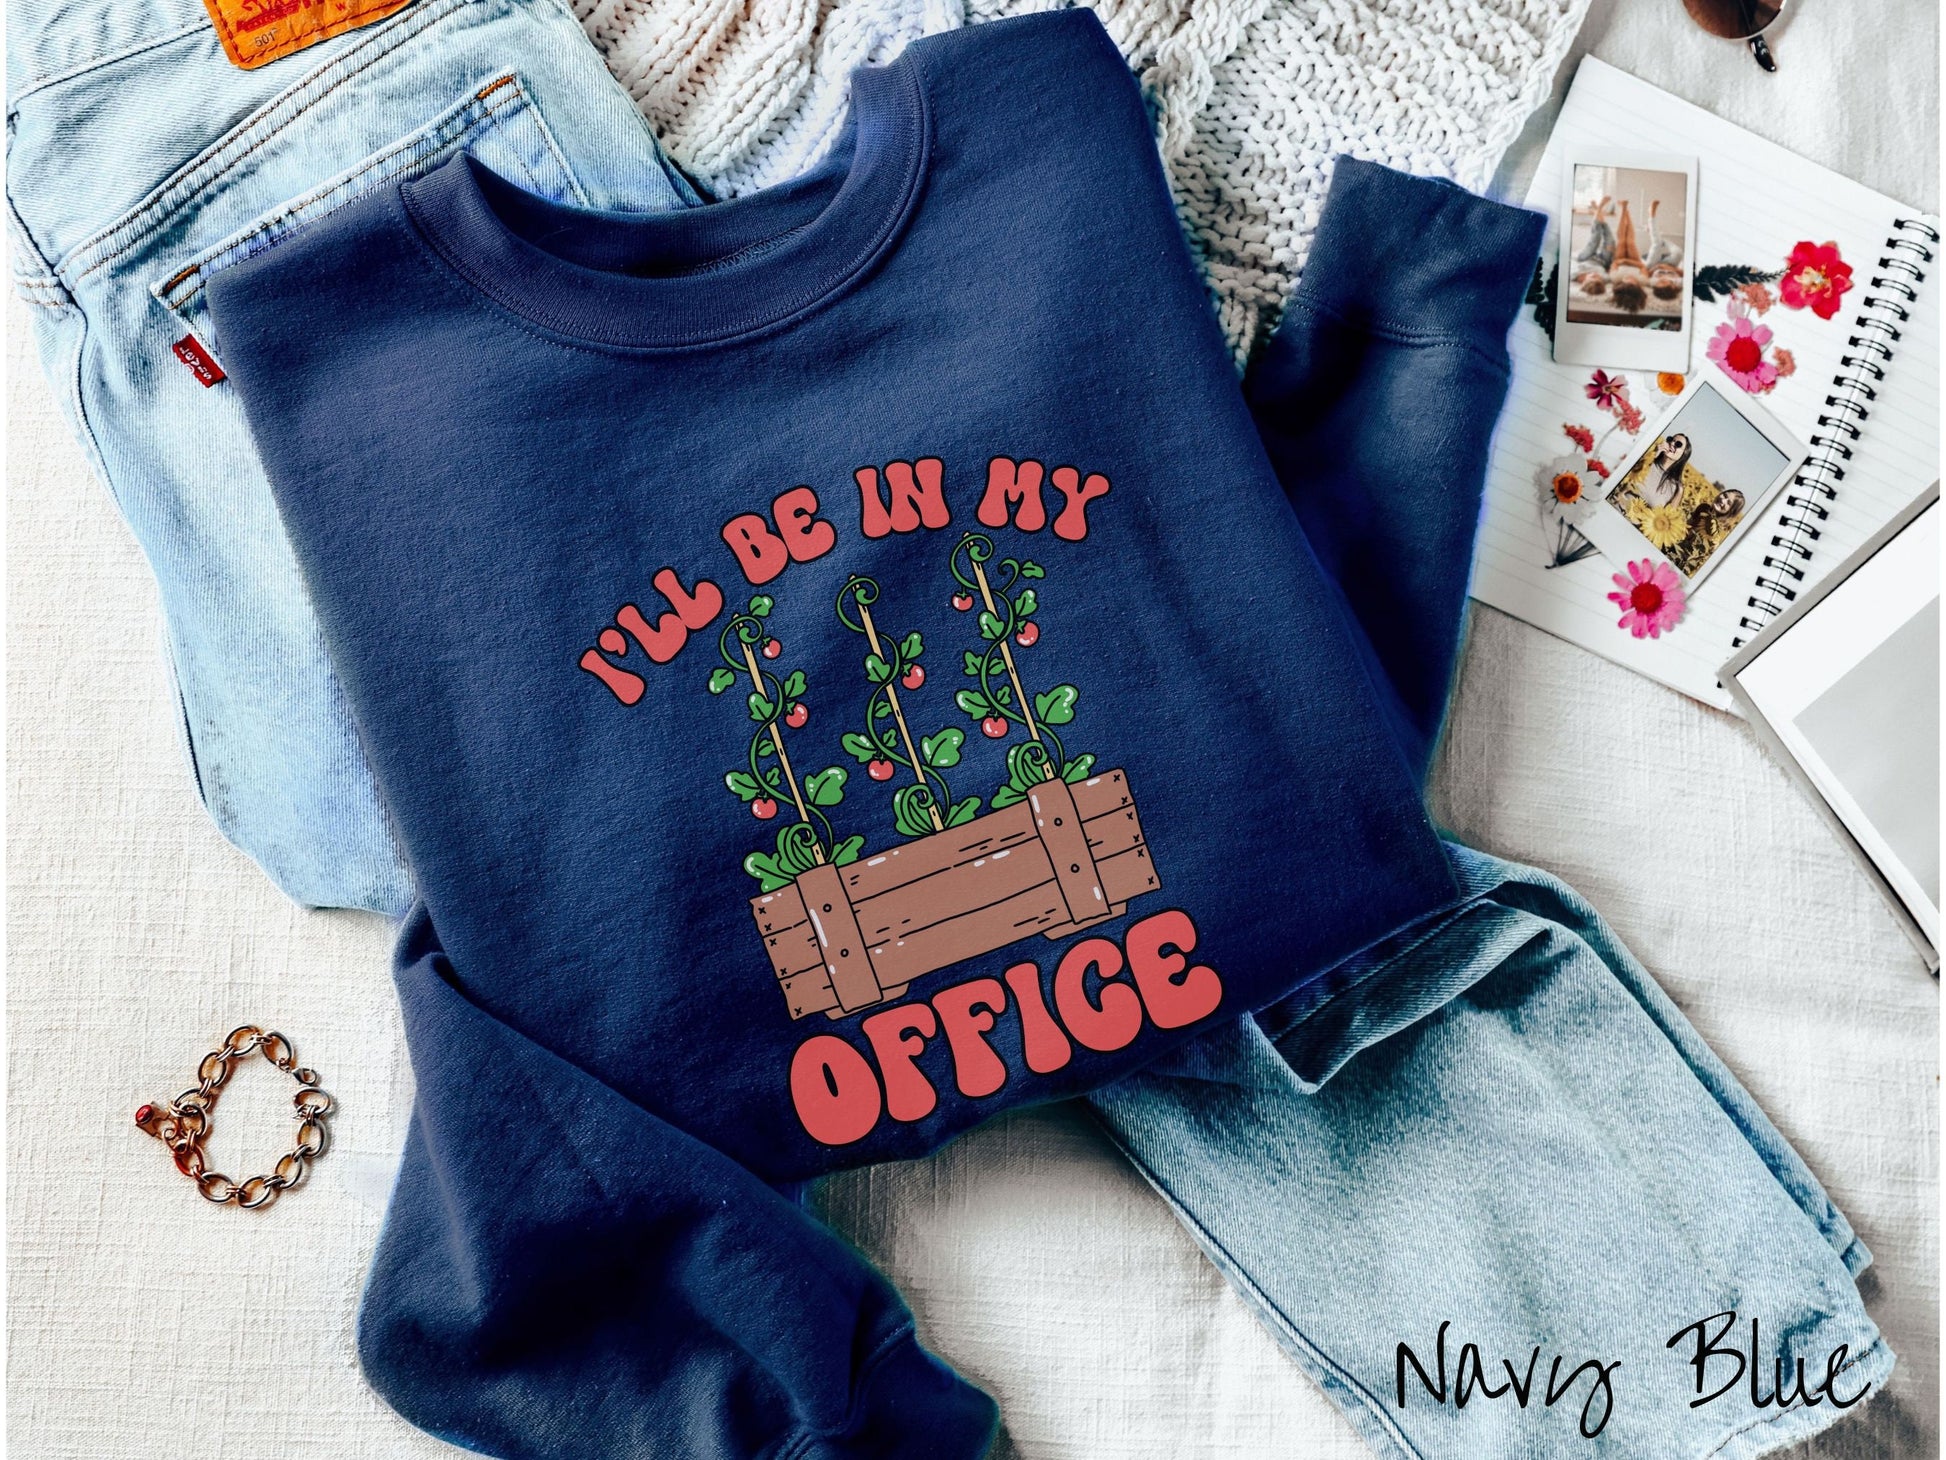 A cute, vintage navy blue colored comfy sweatshirt with the text I’ll Be in My Office in red font across the front. In between the text is a wooden plant holder with three tomato vines sprouting tomatoes climbing upwards.